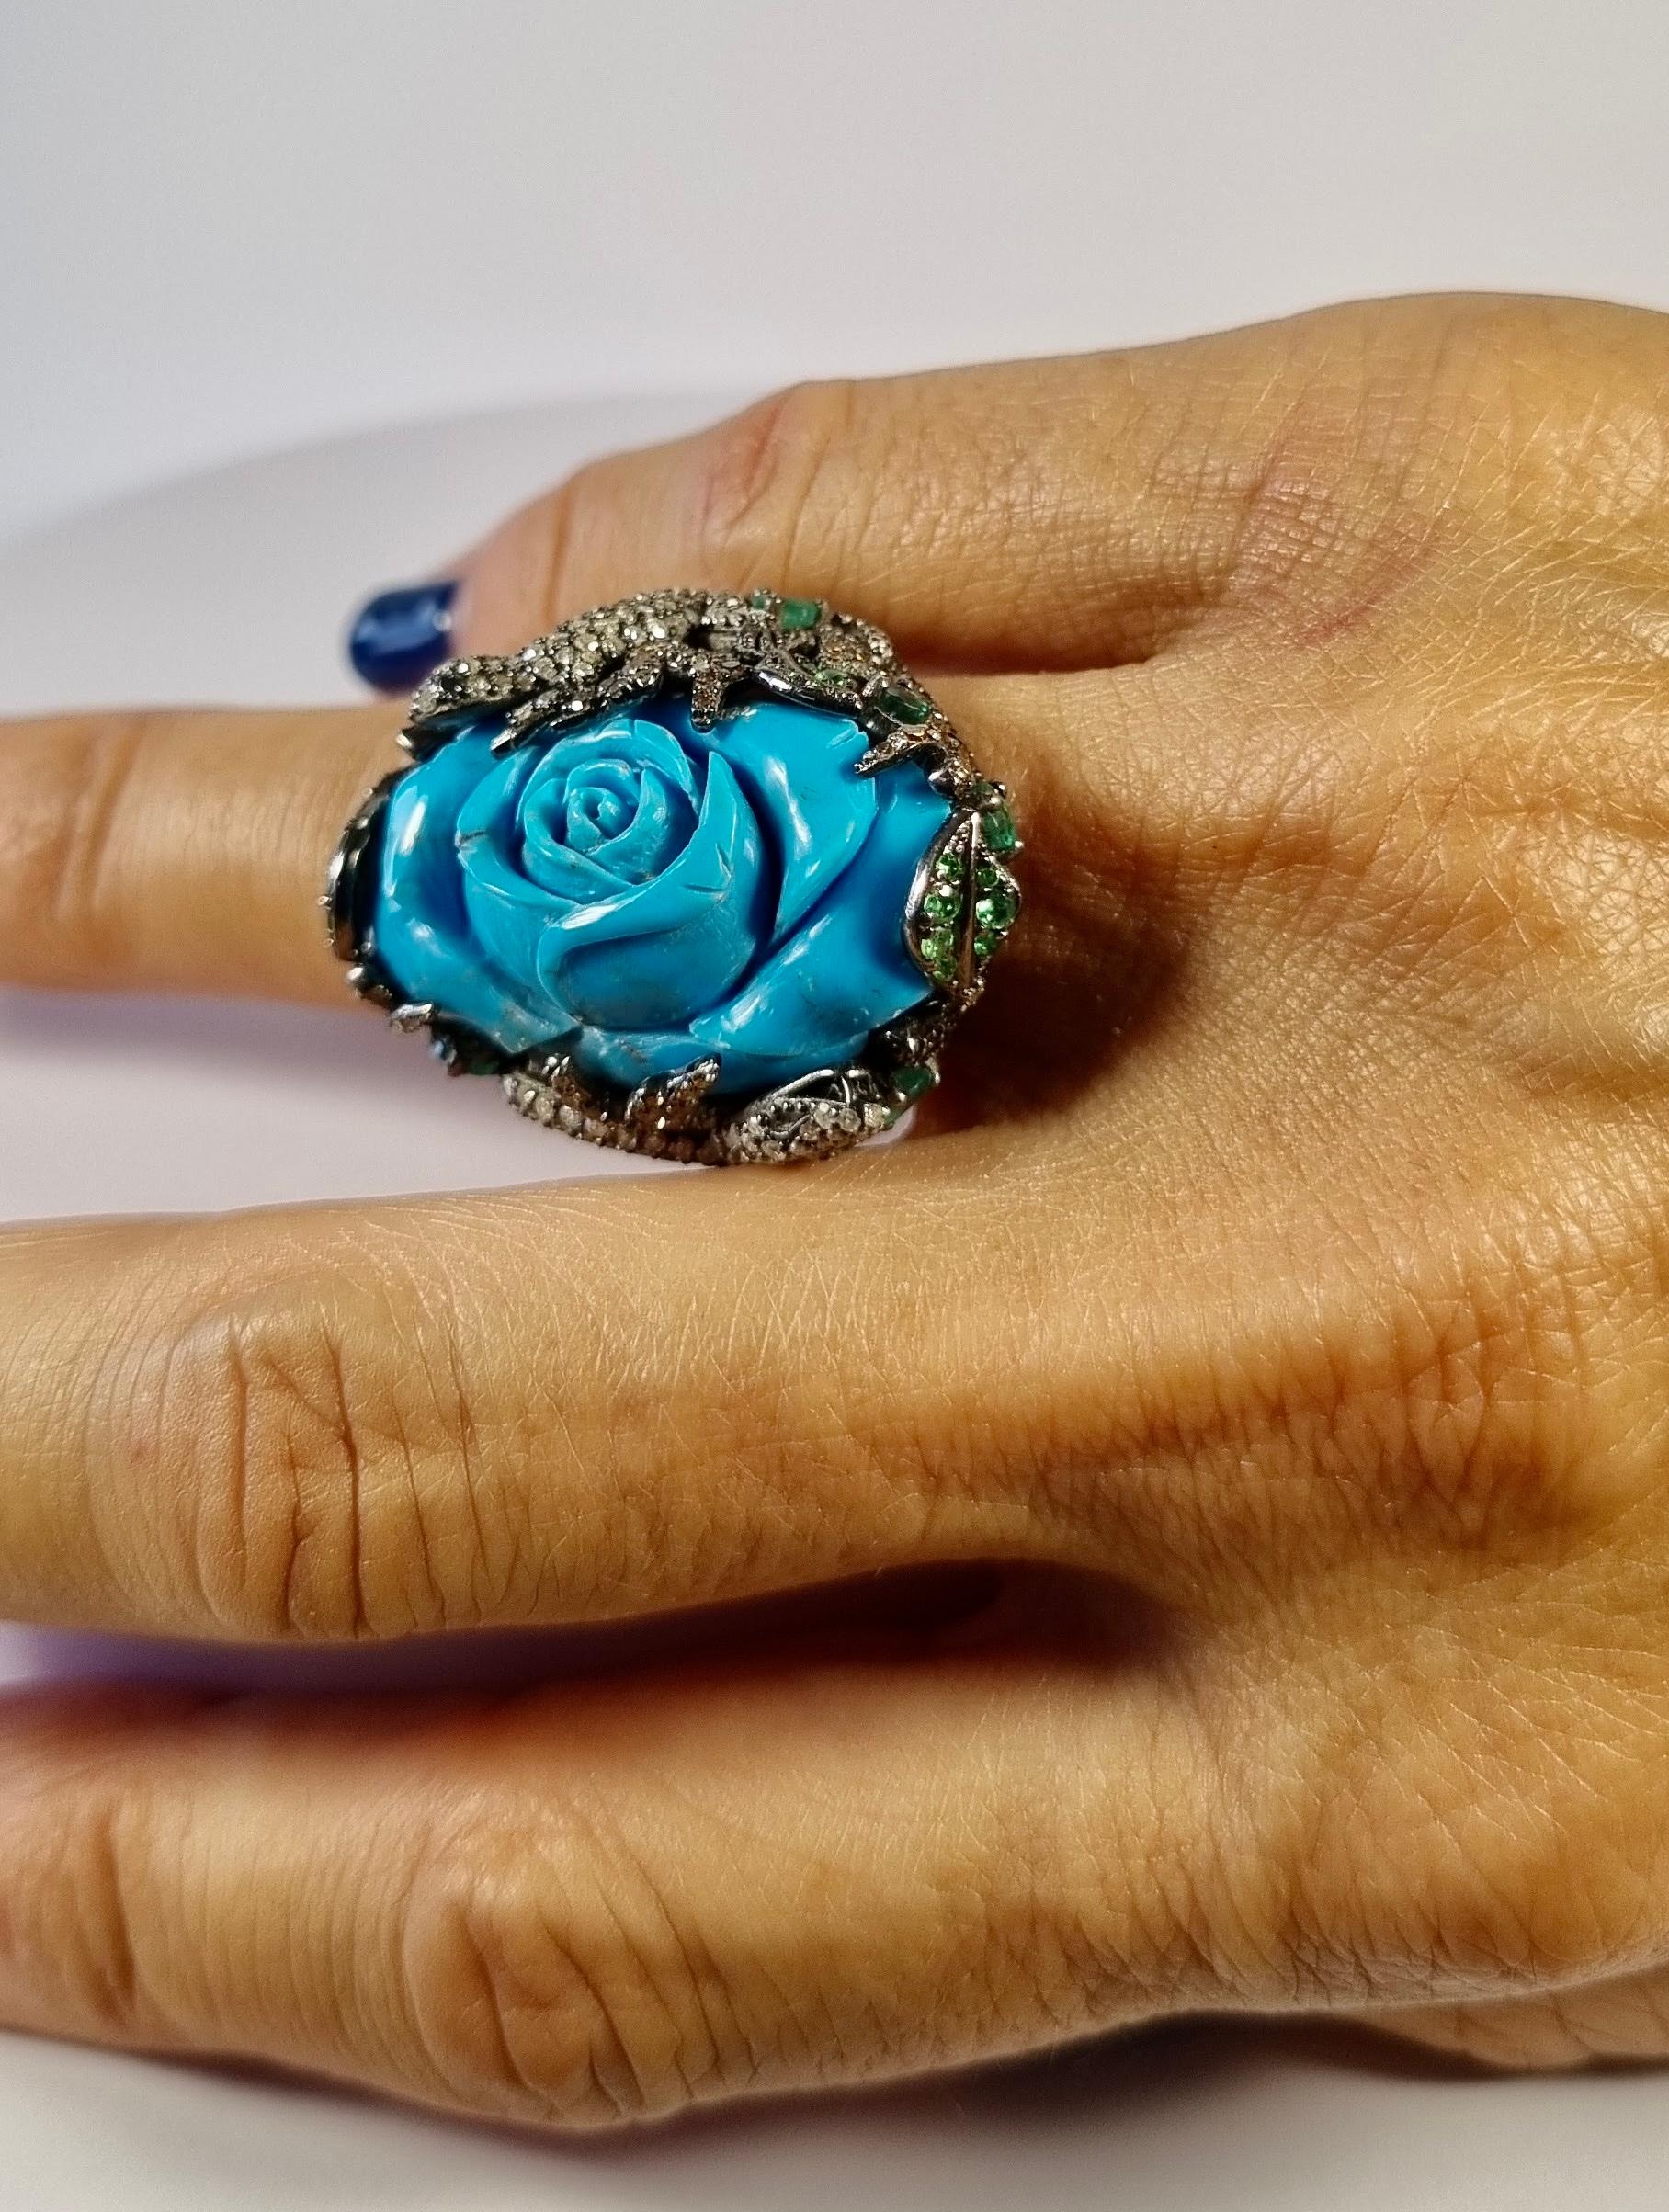 Brilliant Cut Turquoise Flower Ring with Diamonds, Emeralds, Tsavorites in 18k Gold Silver For Sale